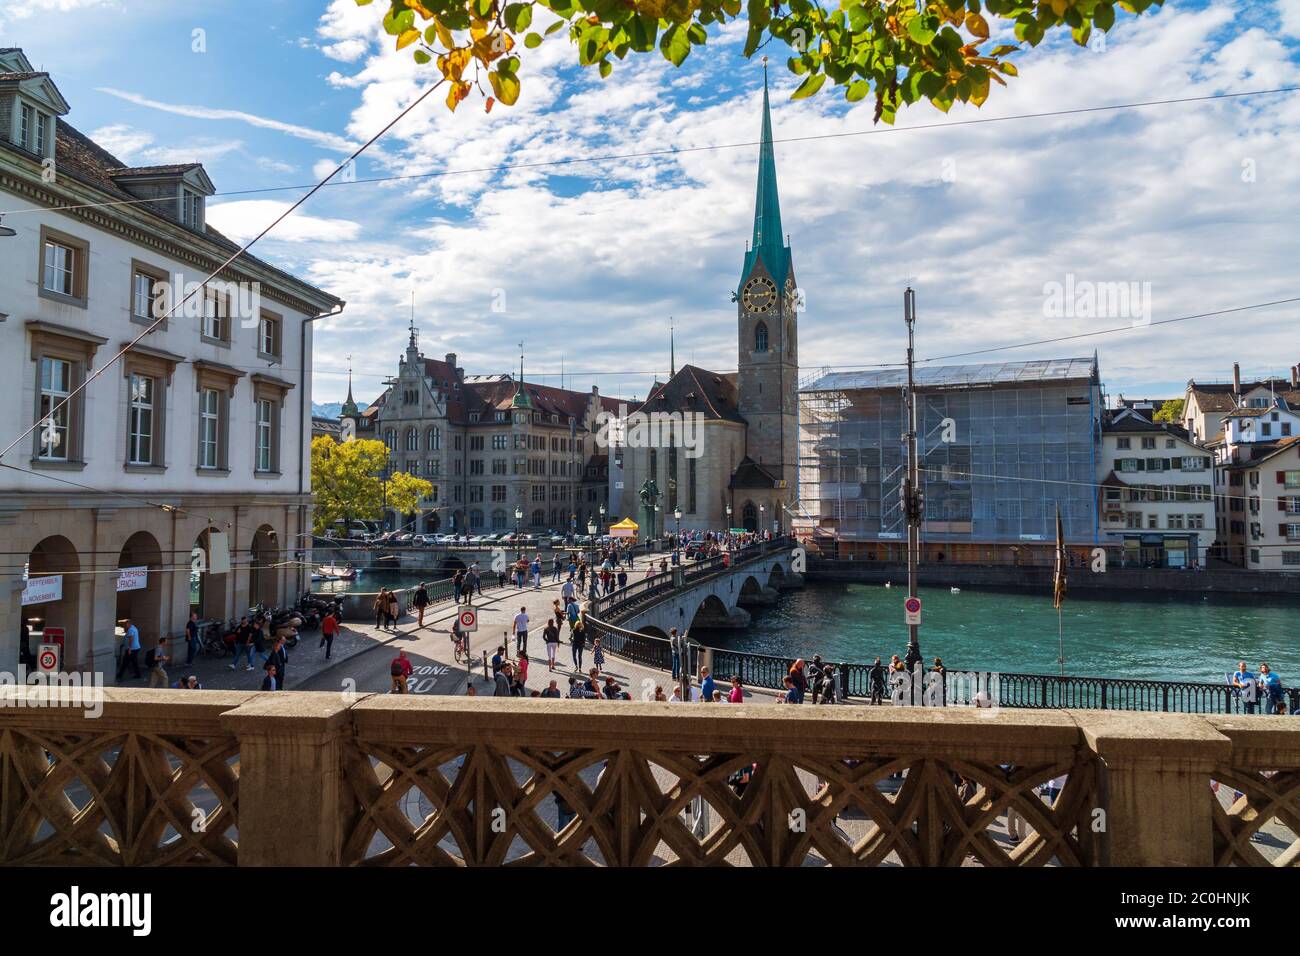 Zurich, Switzerland - October 6, 2018: View on church Fraumünster. People are visiting sights and walking over the bridge Münsterbrücke across a river. Stock Photo